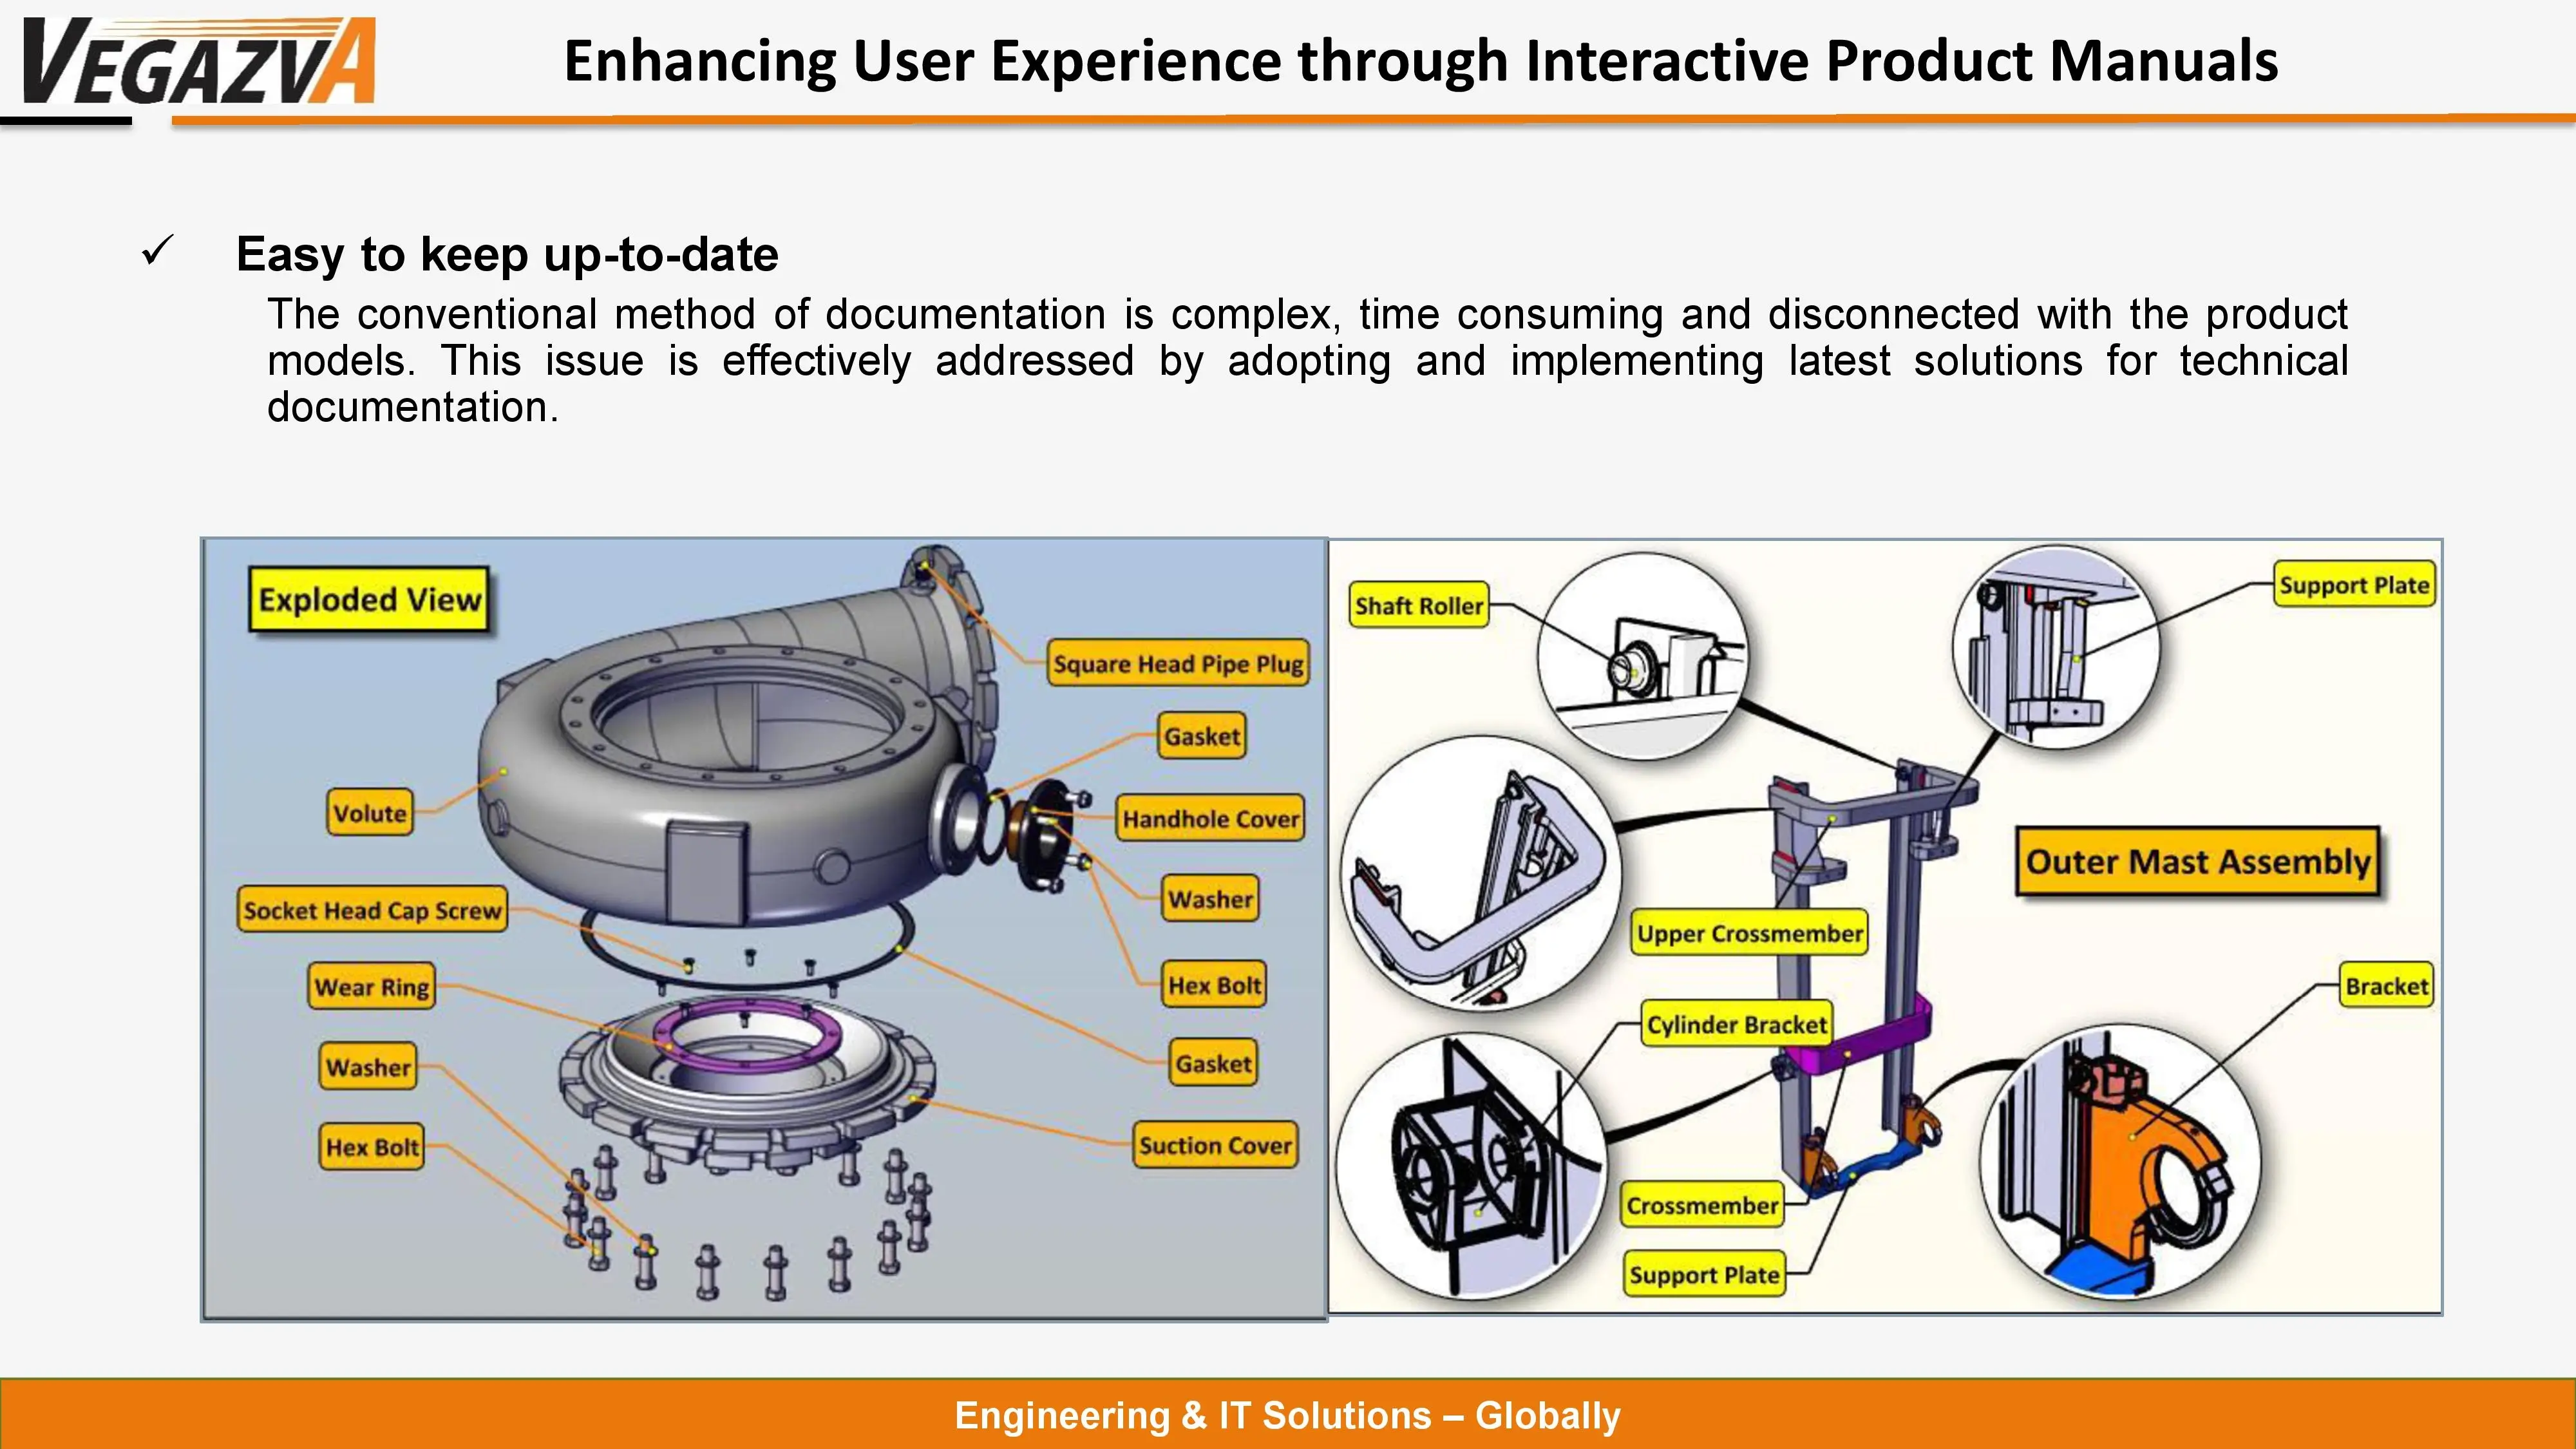 Enhancing User Experience through Interactive Product Manuals